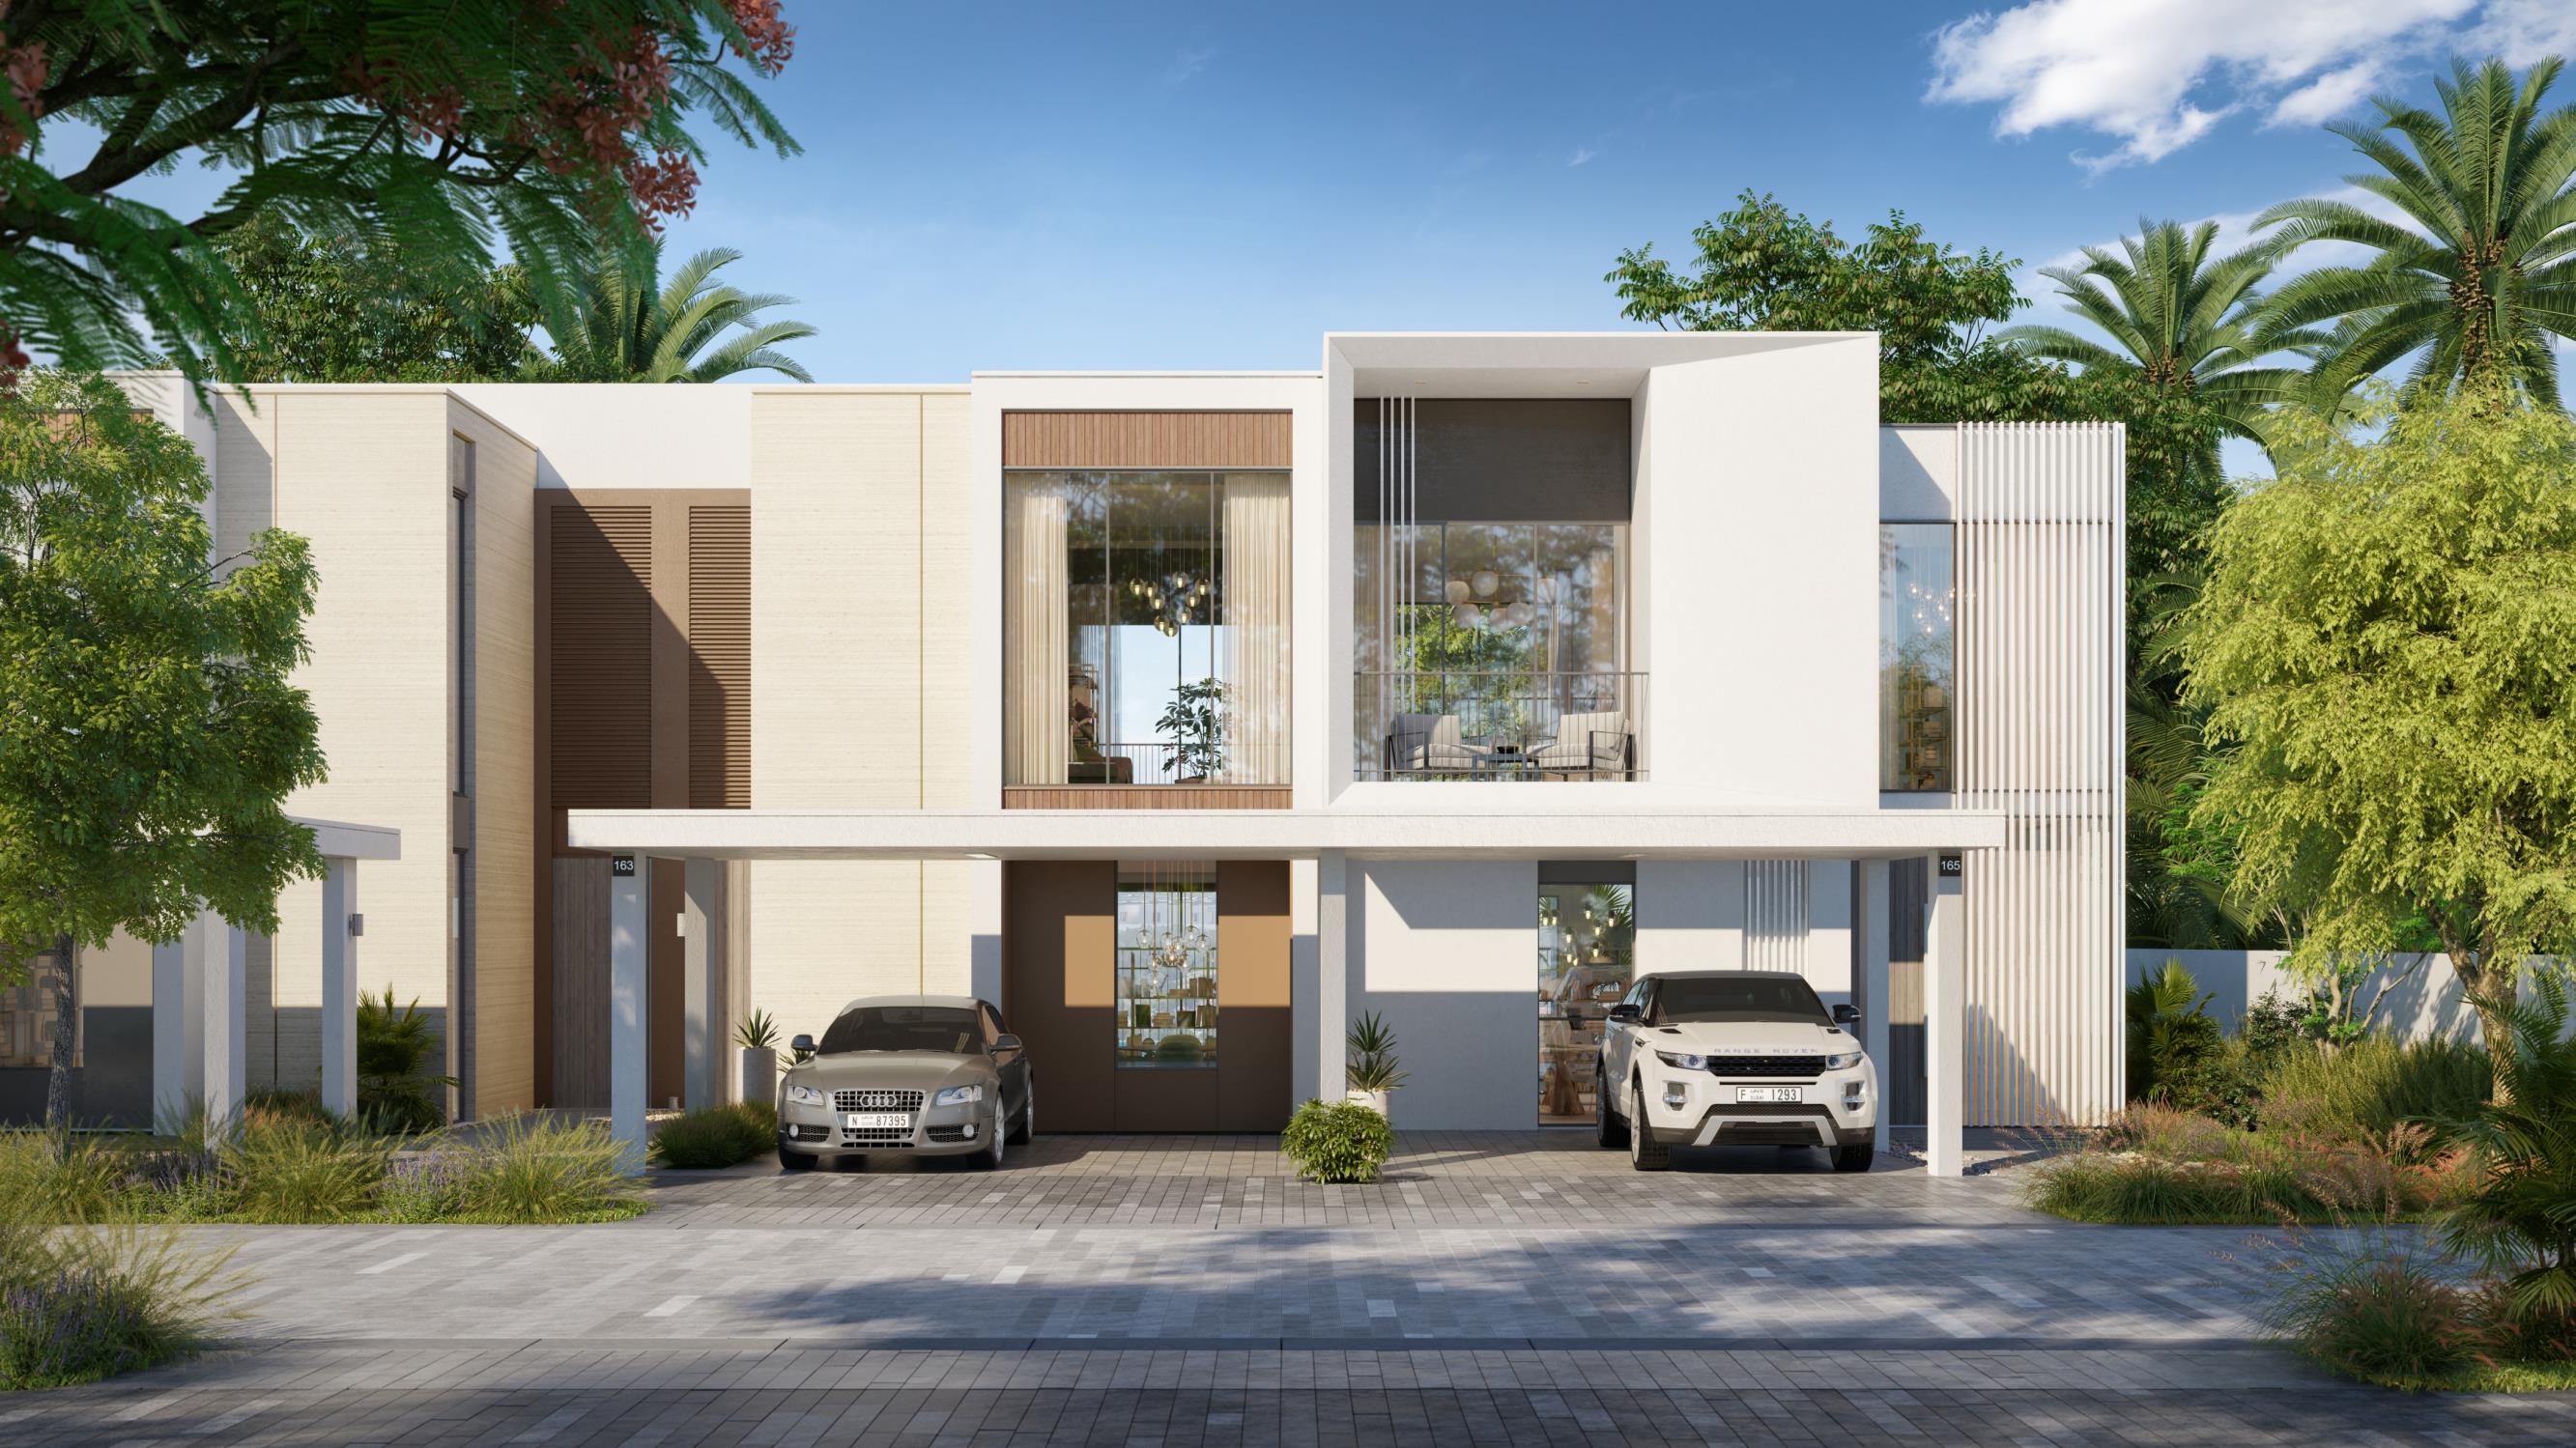 uploads/sale_property/4-br-apartment-for-sale-in-talia-townhouses/f6a4239c9564debb9668f8aa53366ea4.webp